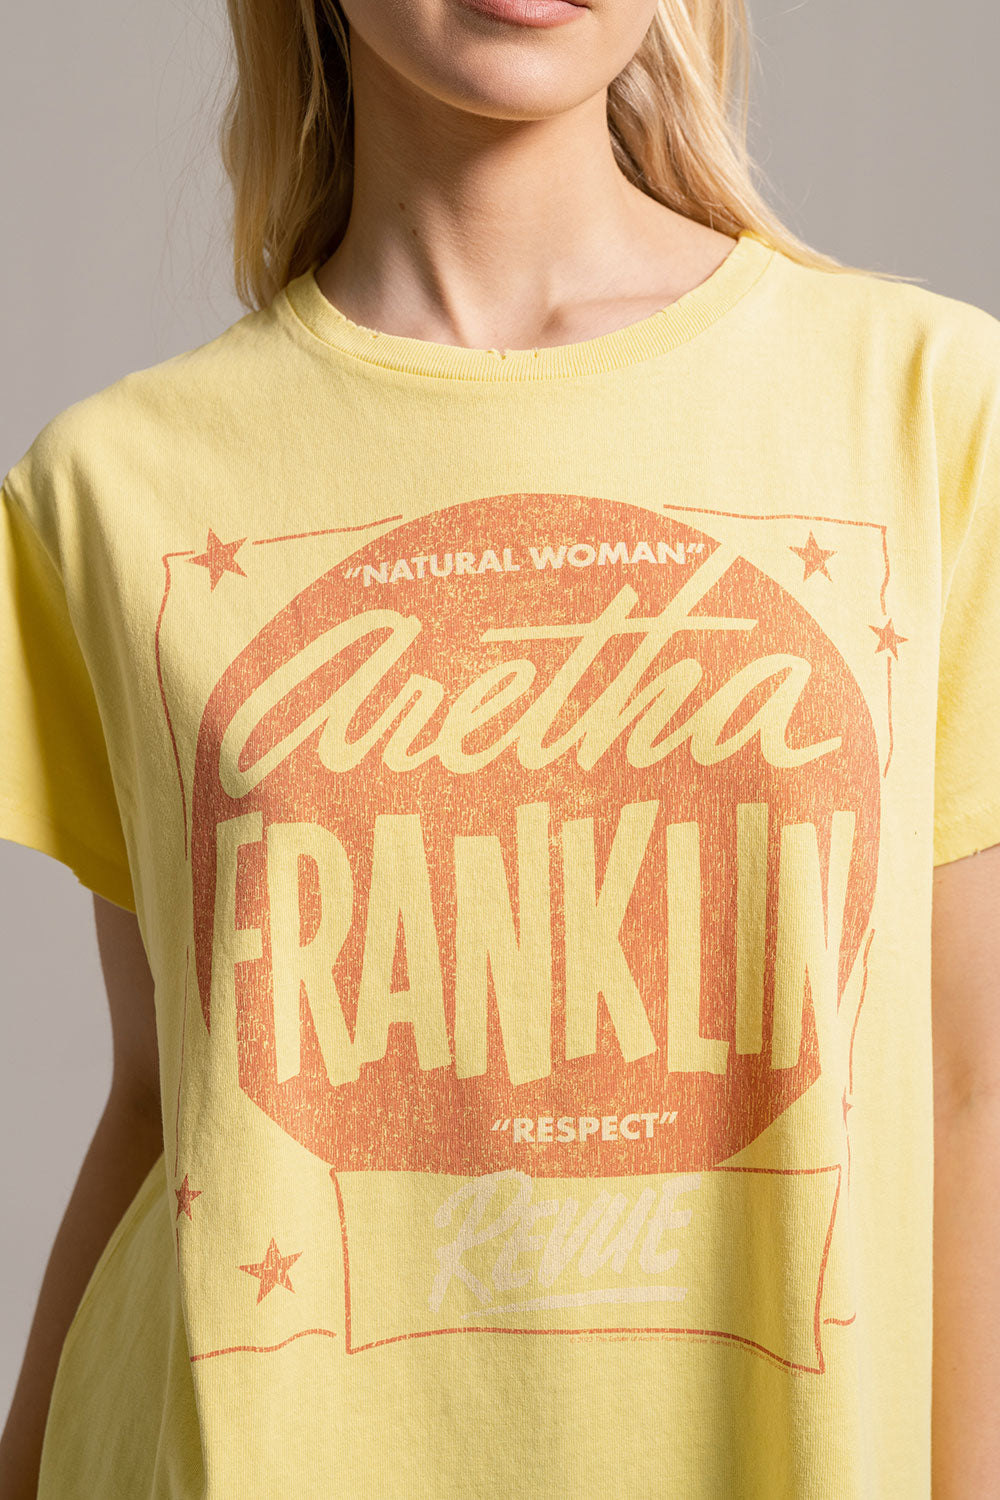 Aretha Franklin - "Respect" Distressed Crew Neck WOMENS chaserbrand